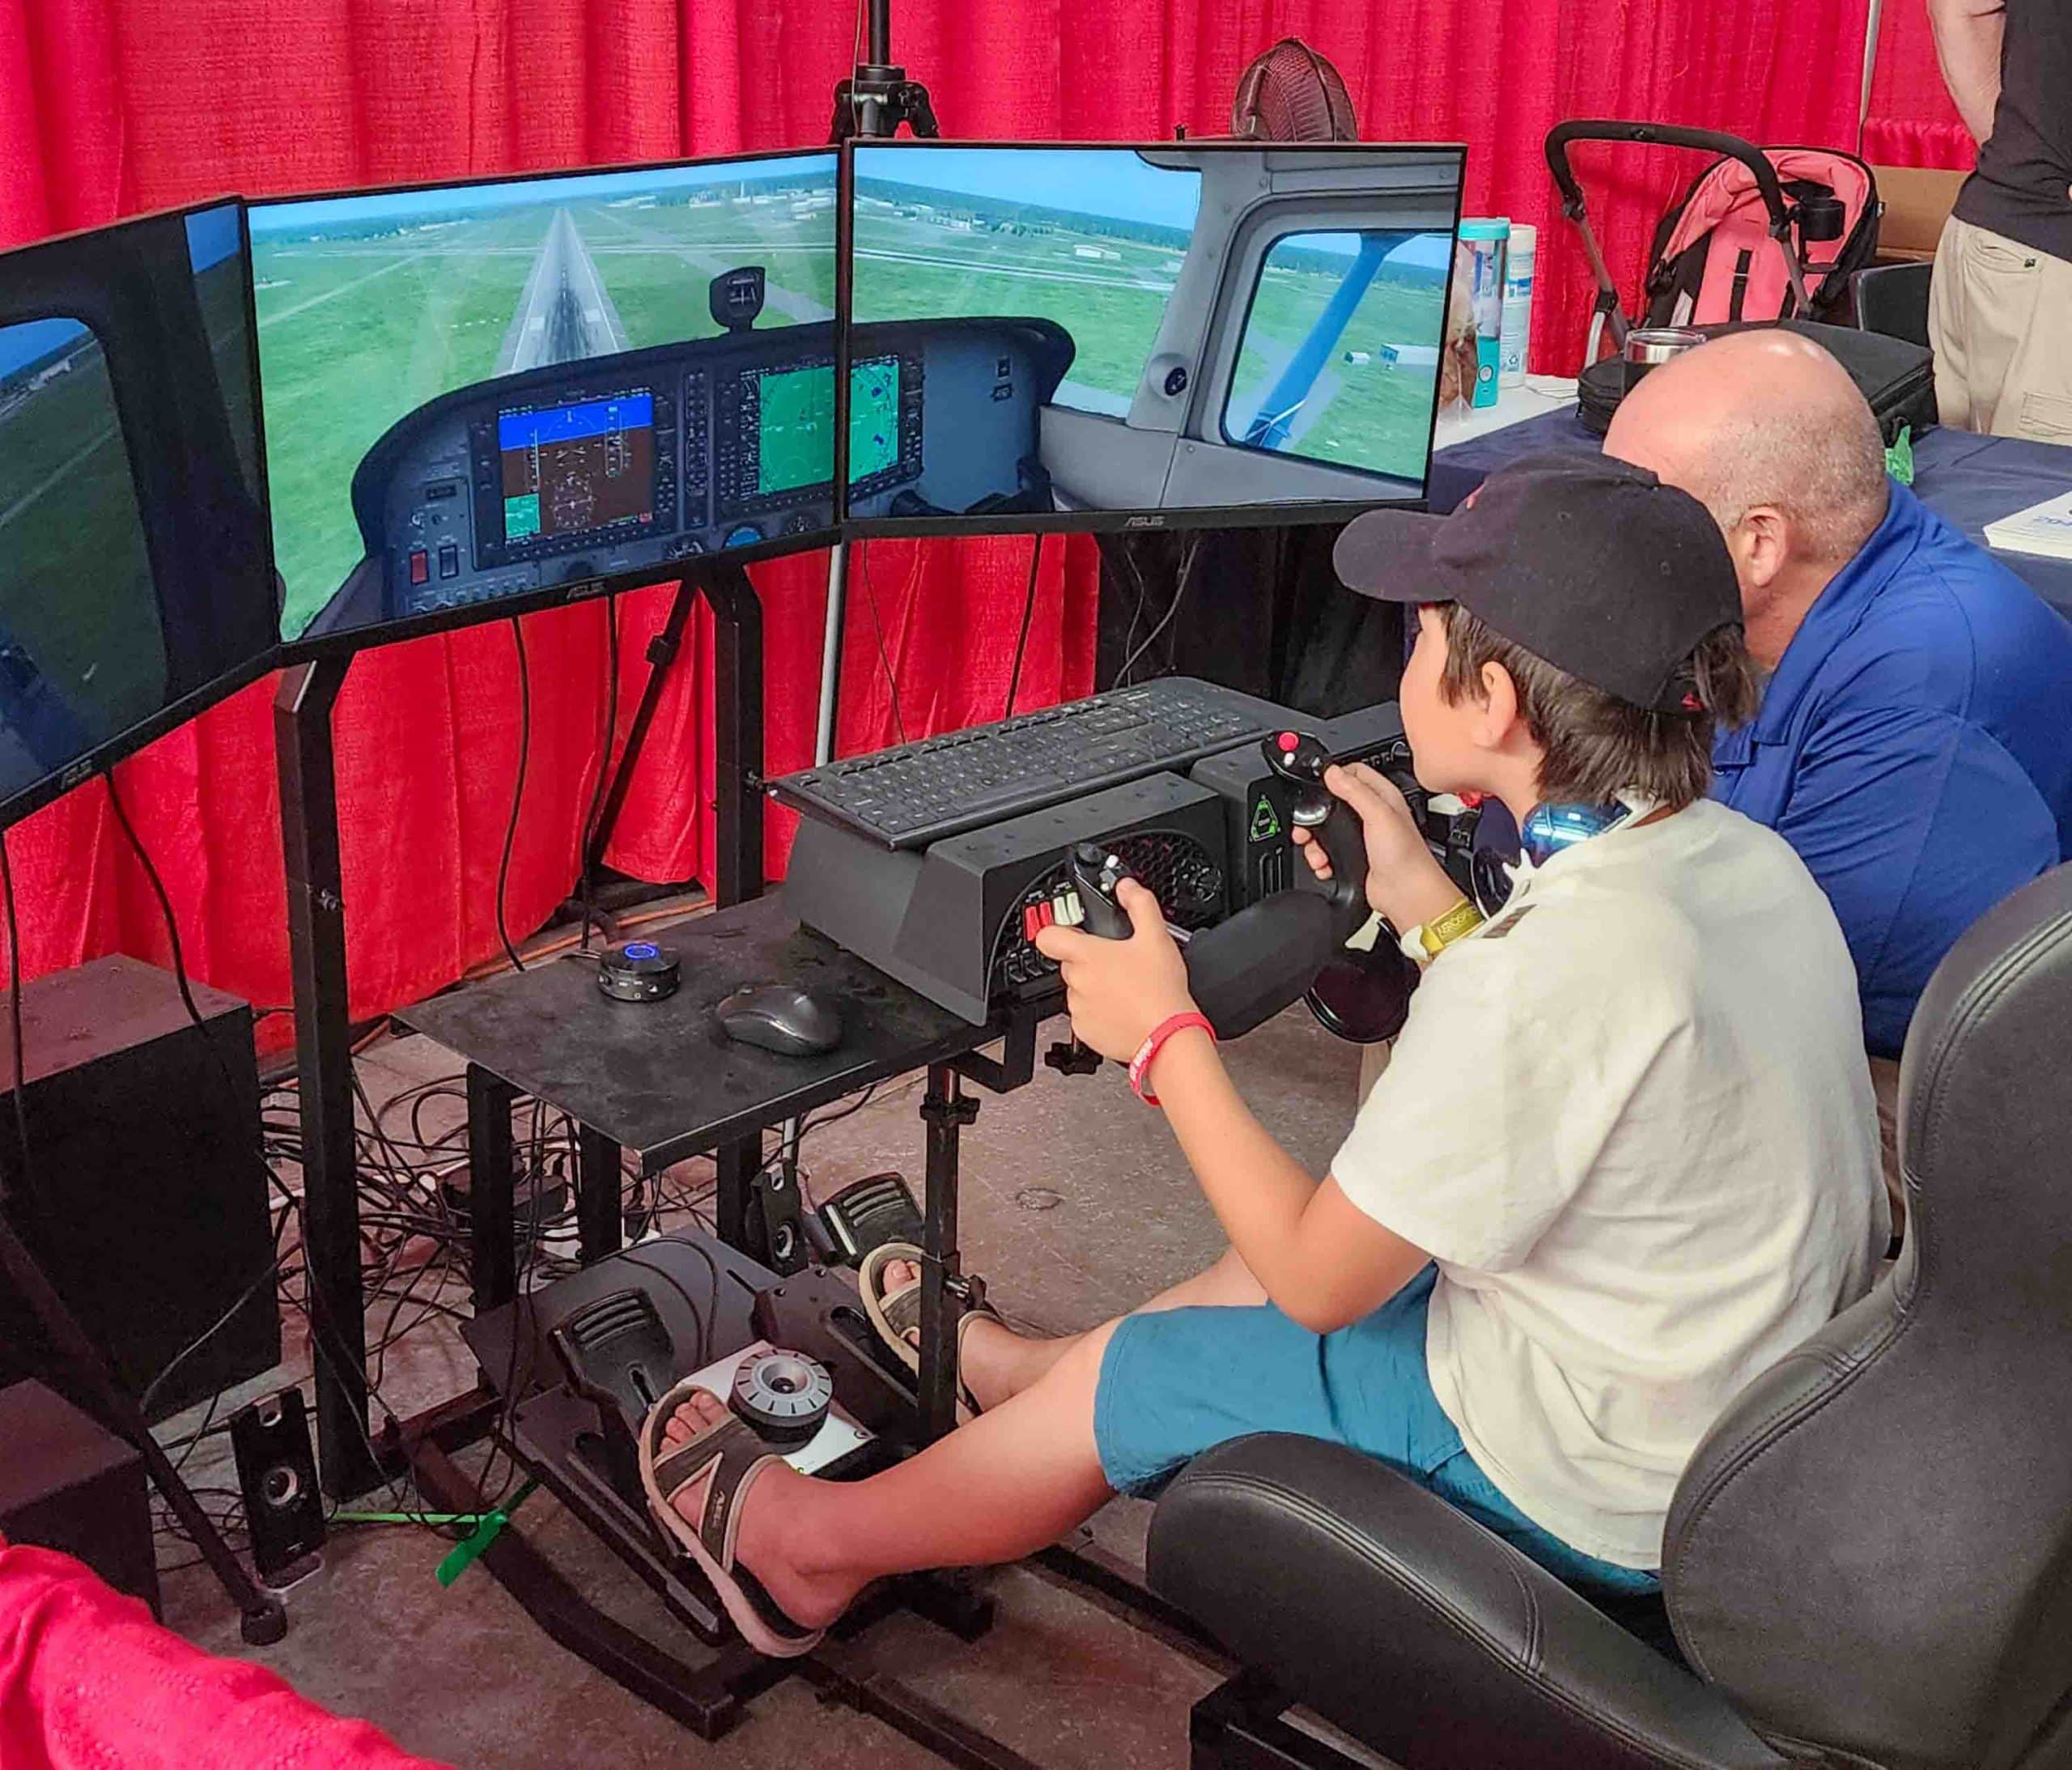 Bryson Ziemer (10) of Crestview, Fla., tries his hand at a flight simulator with guidance from an Embry-Riddle Aeronautical University instructor. Photo credit: Mark Stone